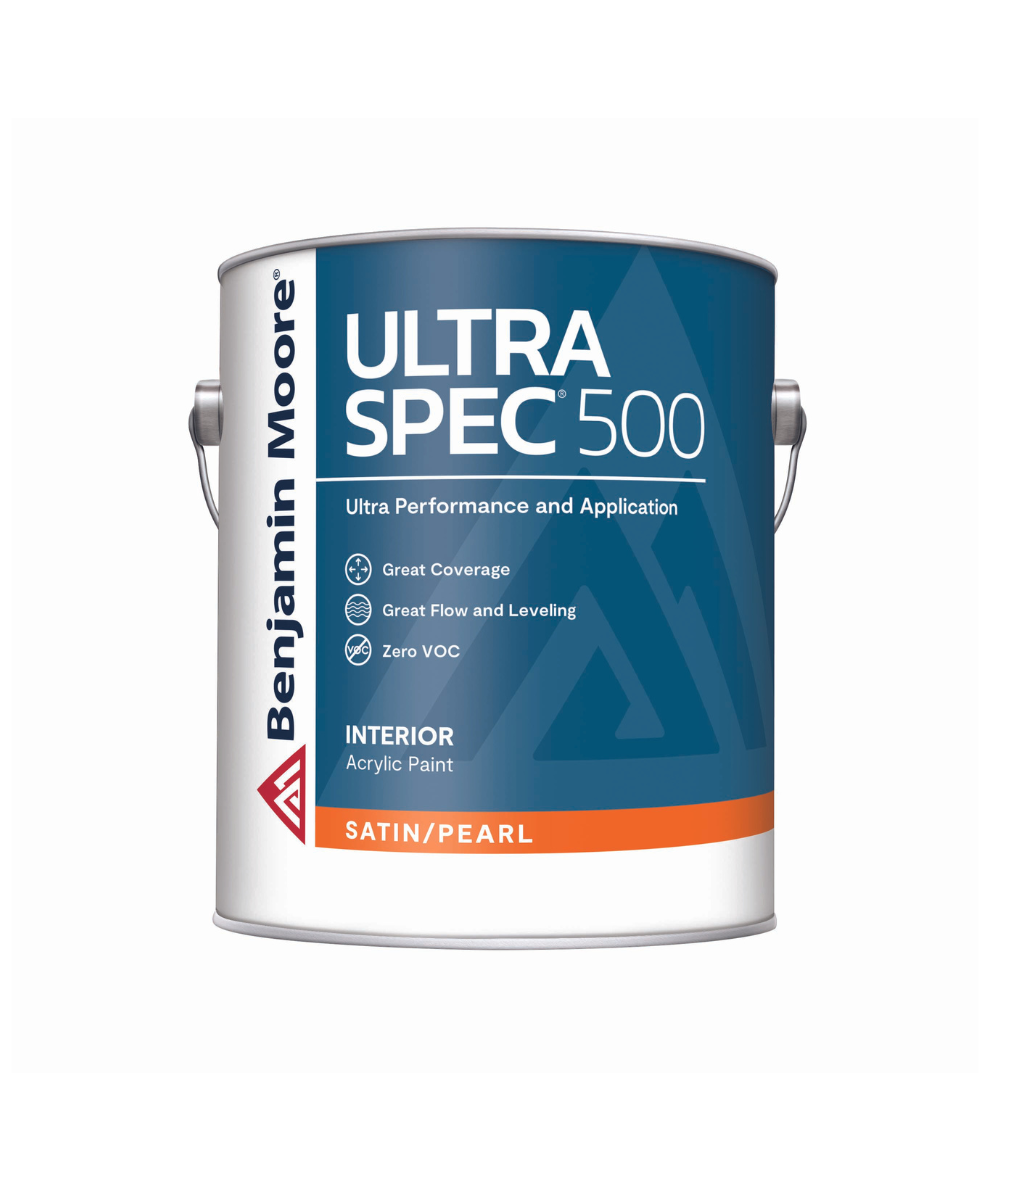 Benjamin Moore Ultra Spec 500 Satin/Pearl Interior Paint available at JC Licht.